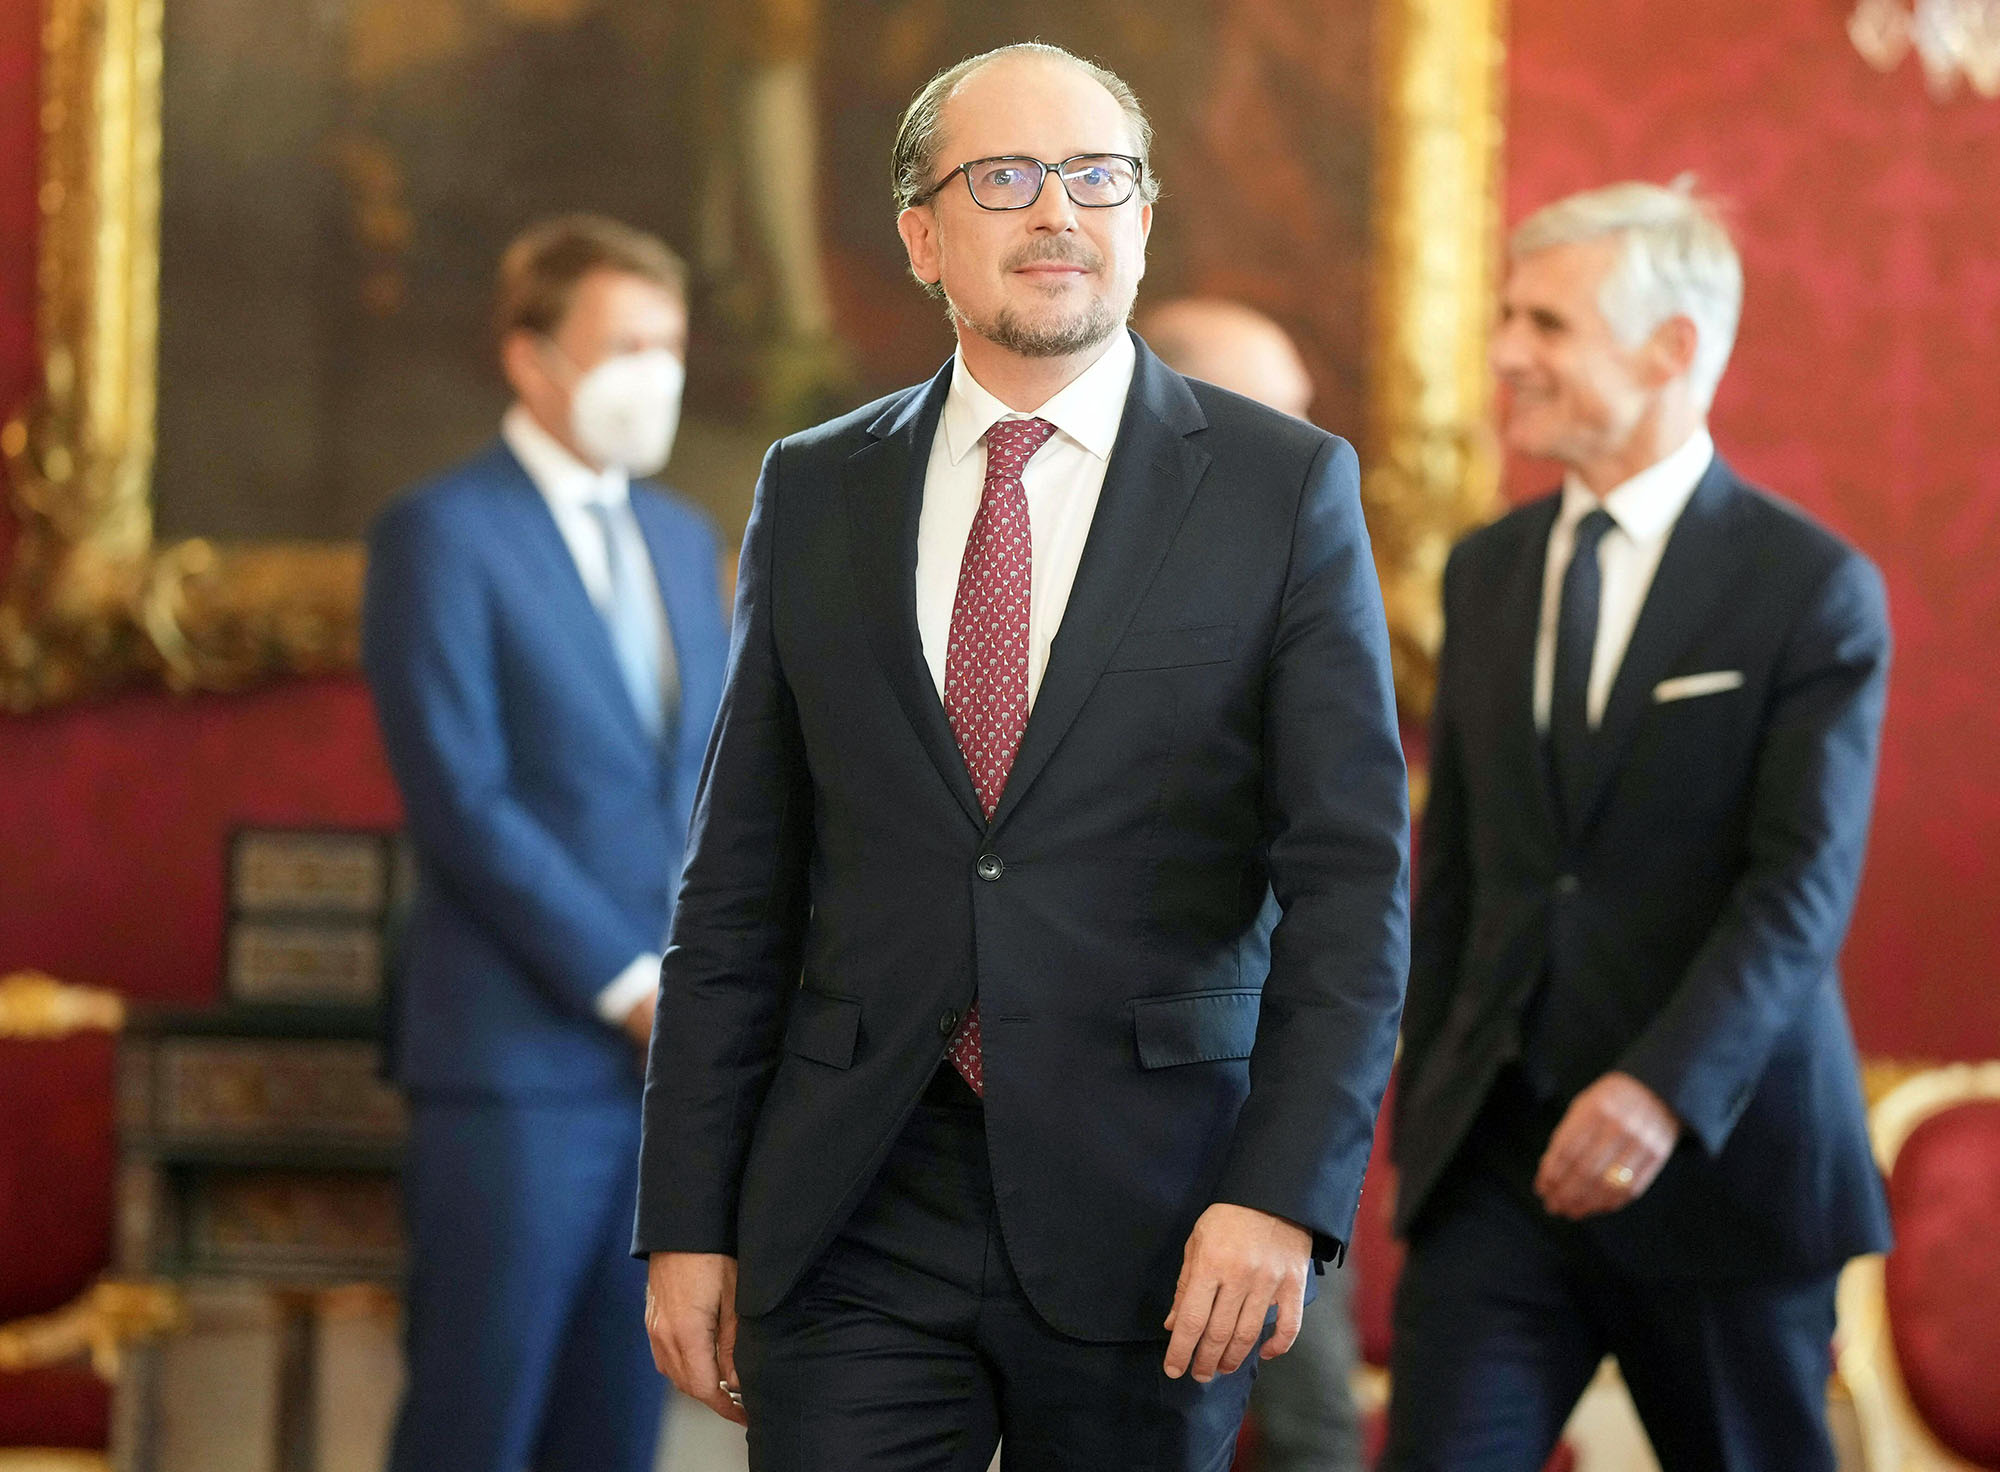 Austria's outgoing Foreign Minister Alexander Schallenberg (C) arriveS for a swearing-in ceremony hosted by Austria's President at the Presidential Hofburg palace in Vienna, Austria, on October 10, 2021. – Alexander Schallenberg is to take over as Austrian chancellor after Sebastian Kurz on October 9, 2021 announced he was stepping down as chancellor following pressure on him to resign after he was implicated in a corruption scandal. (Photo by GEORG HOCHMUTH / APA / AFP) / Austria OUT